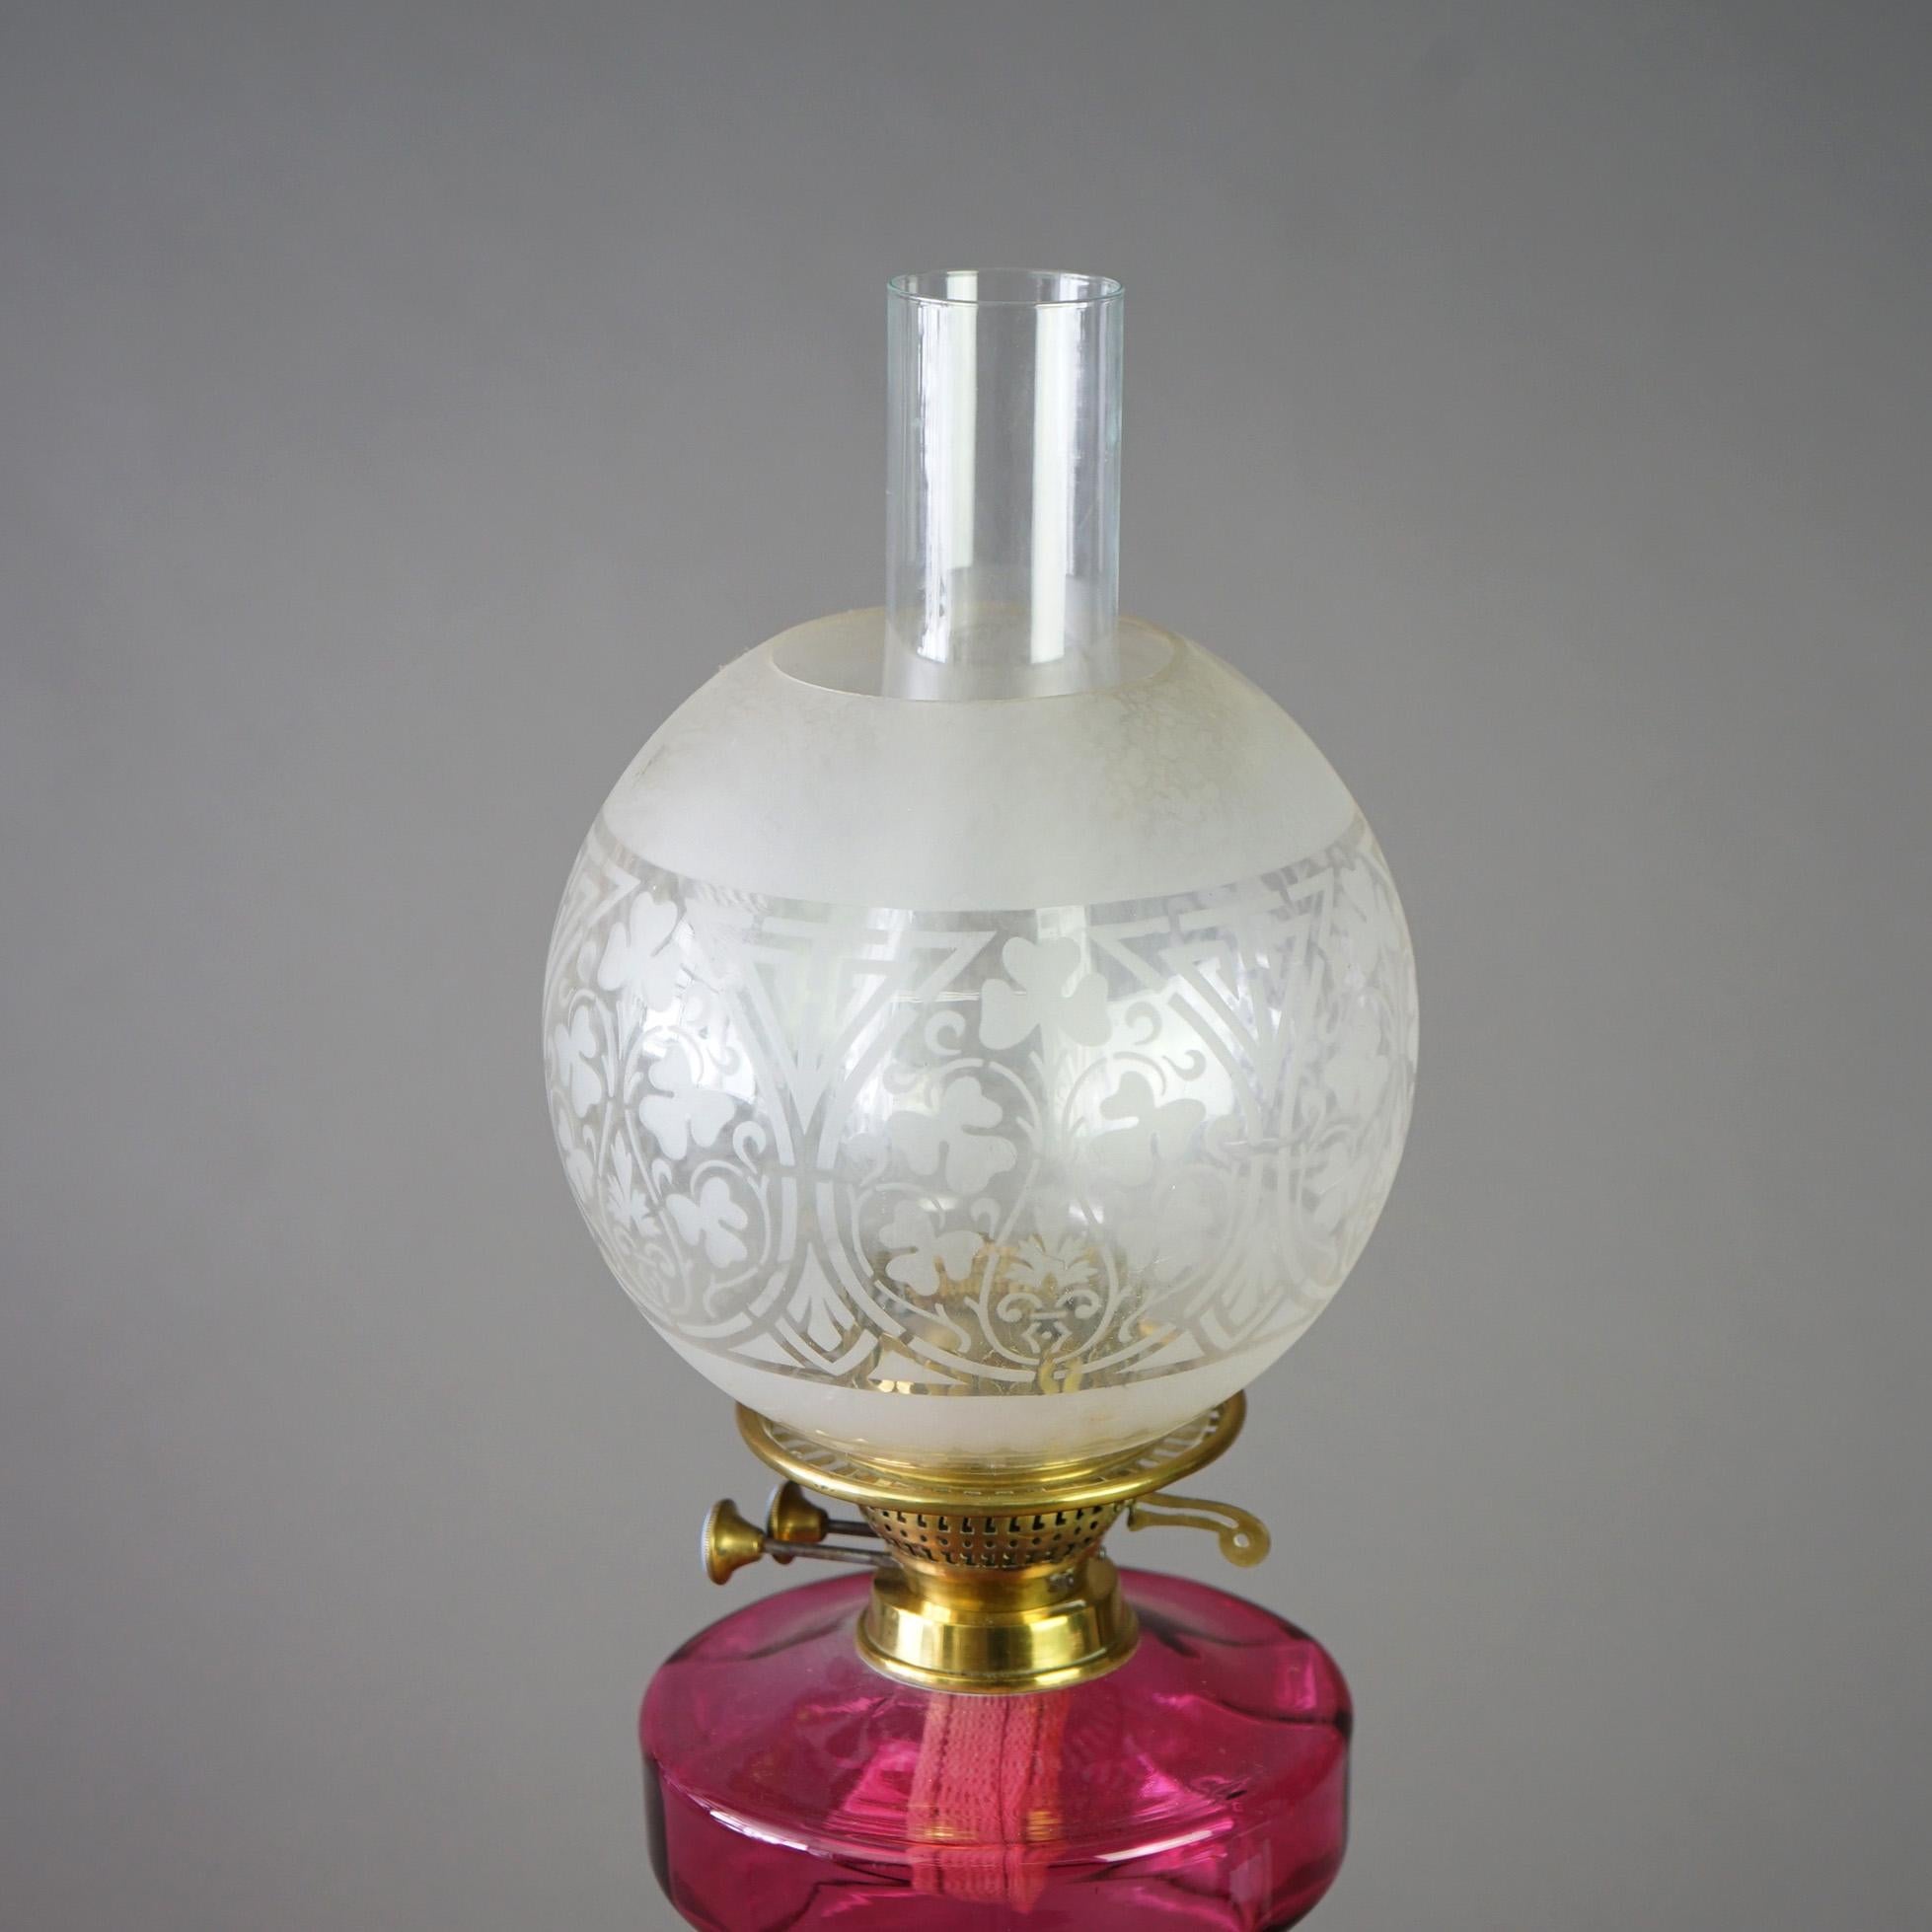 19th Century Antique Brass &Cranberry Glass “Gone With The Wind” Oil Lamp C1890 For Sale